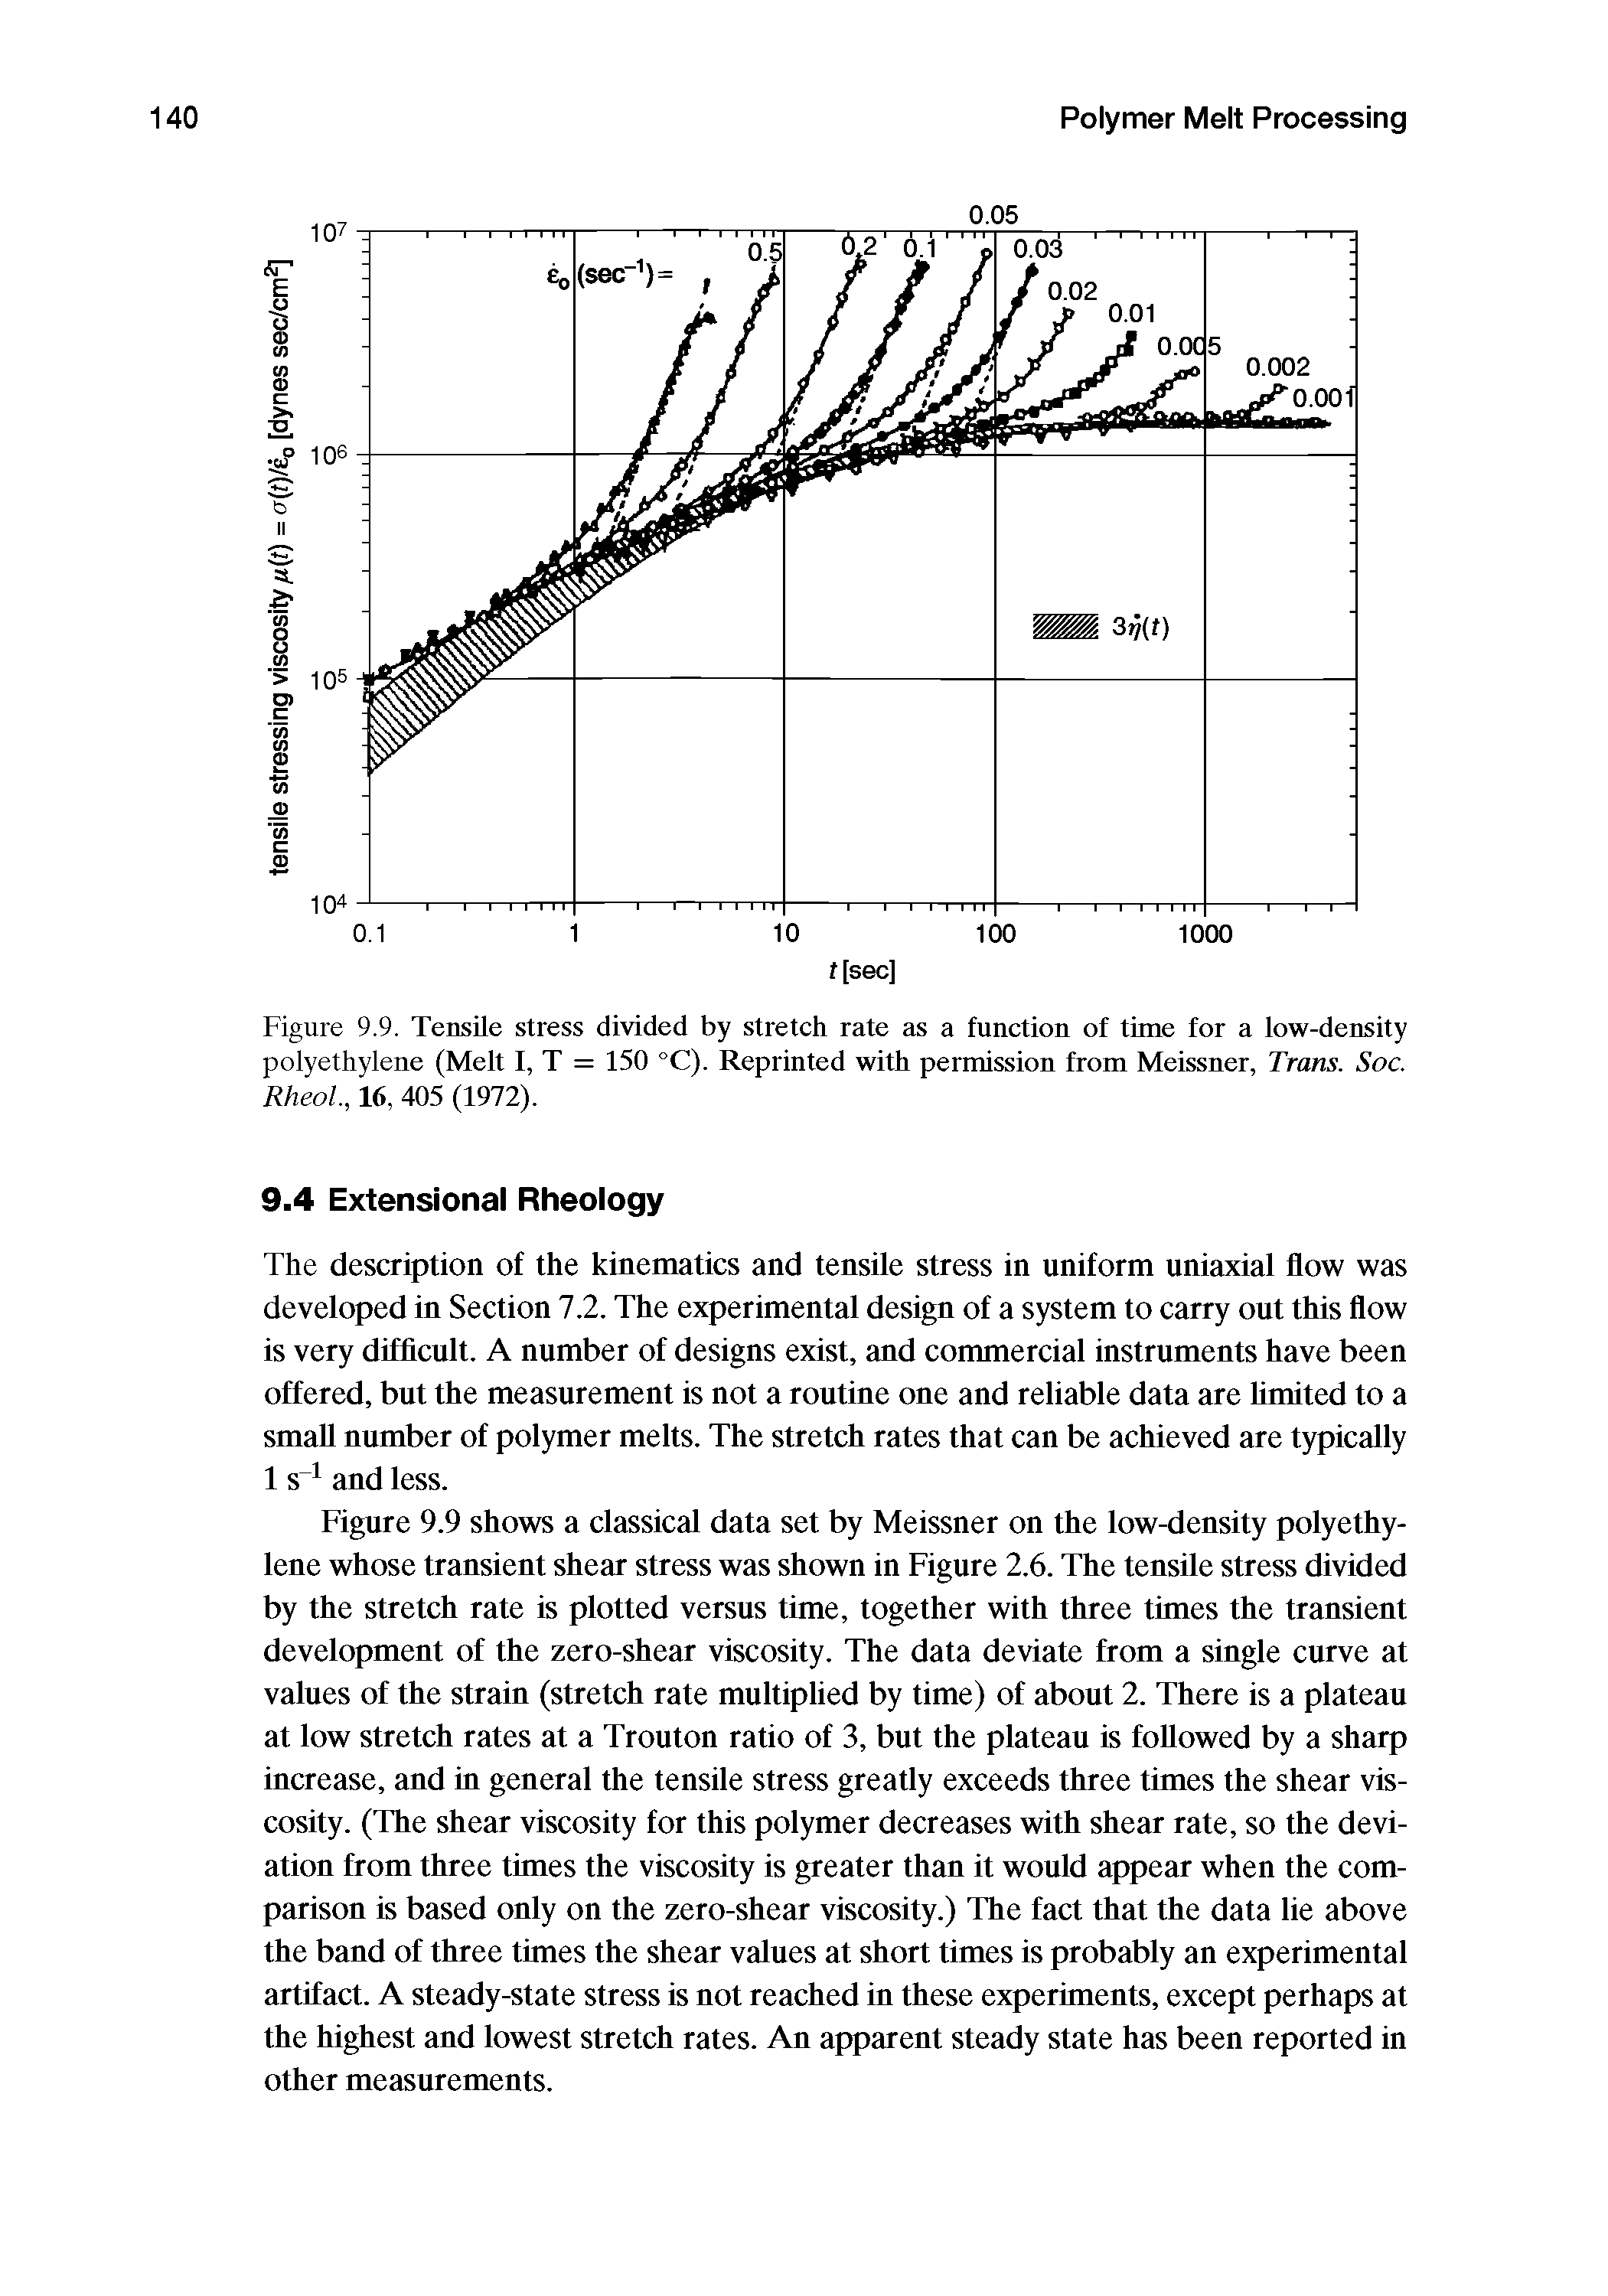 Figure 9.9 shows a classical data set by Meissner on the low-density polyethylene whose transient shear stress was shown in Figure 2.6. The tensile stress divided by the stretch rate is plotted versus time, together with three times the transient development of the zero-shear viscosity. The data deviate from a single curve at values of the strain (stretch rate multiplied by time) of about 2. There is a plateau at low stretch rates at a Trouton ratio of 3, but the plateau is followed by a sharp increase, and in general the tensile stress greatly exceeds three times the shear viscosity. (The shear viscosity for this polymer decreases with shear rate, so the deviation from three times the viscosity is greater than it would appear when the comparison is based only on the zero-shear viscosity.) The fact that the data lie above the band of three times the shear values at short times is probably an experimental artifact. A steady-state stress is not reached in these experiments, except perhaps at the highest and lowest stretch rates. An apparent steady state has been reported in other measurements.